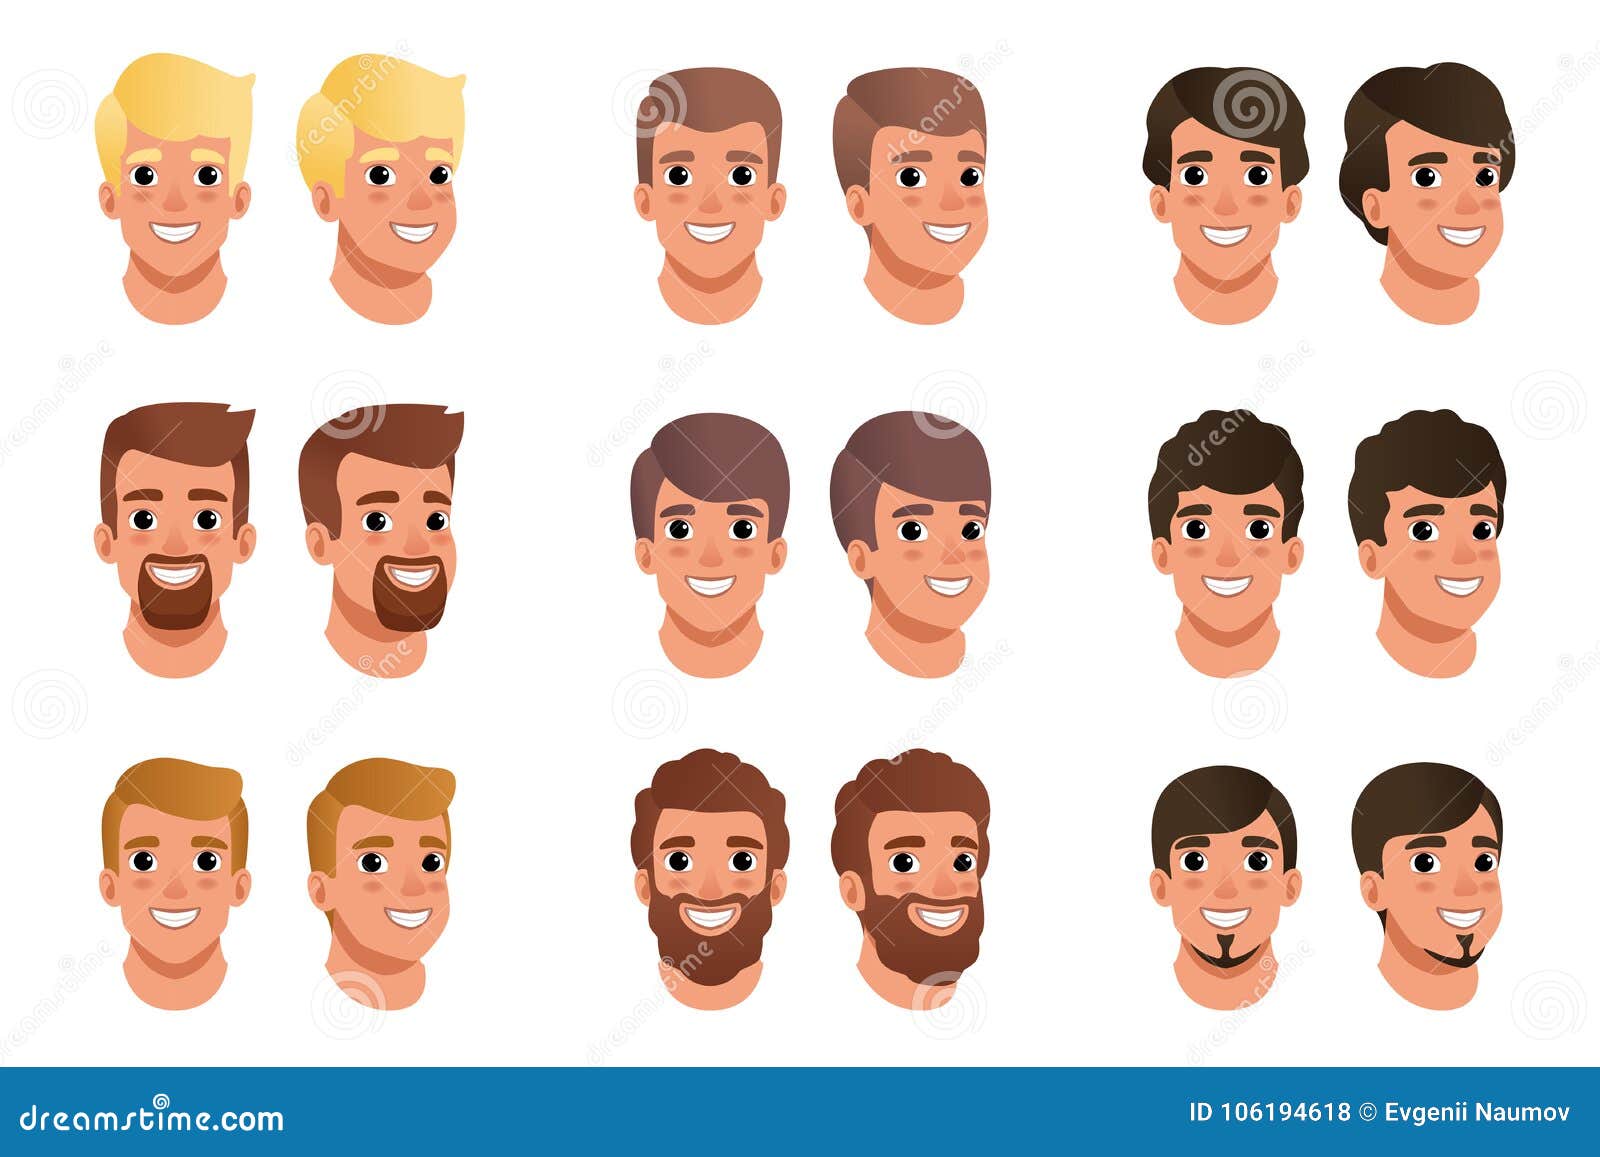 Cartoon Set of Men Avatars with Different Hair Styles, Colors and Beards:  Black, Blonde, Brown. Human Head. Male with Stock Vector - Illustration of  people, graphic: 106194618